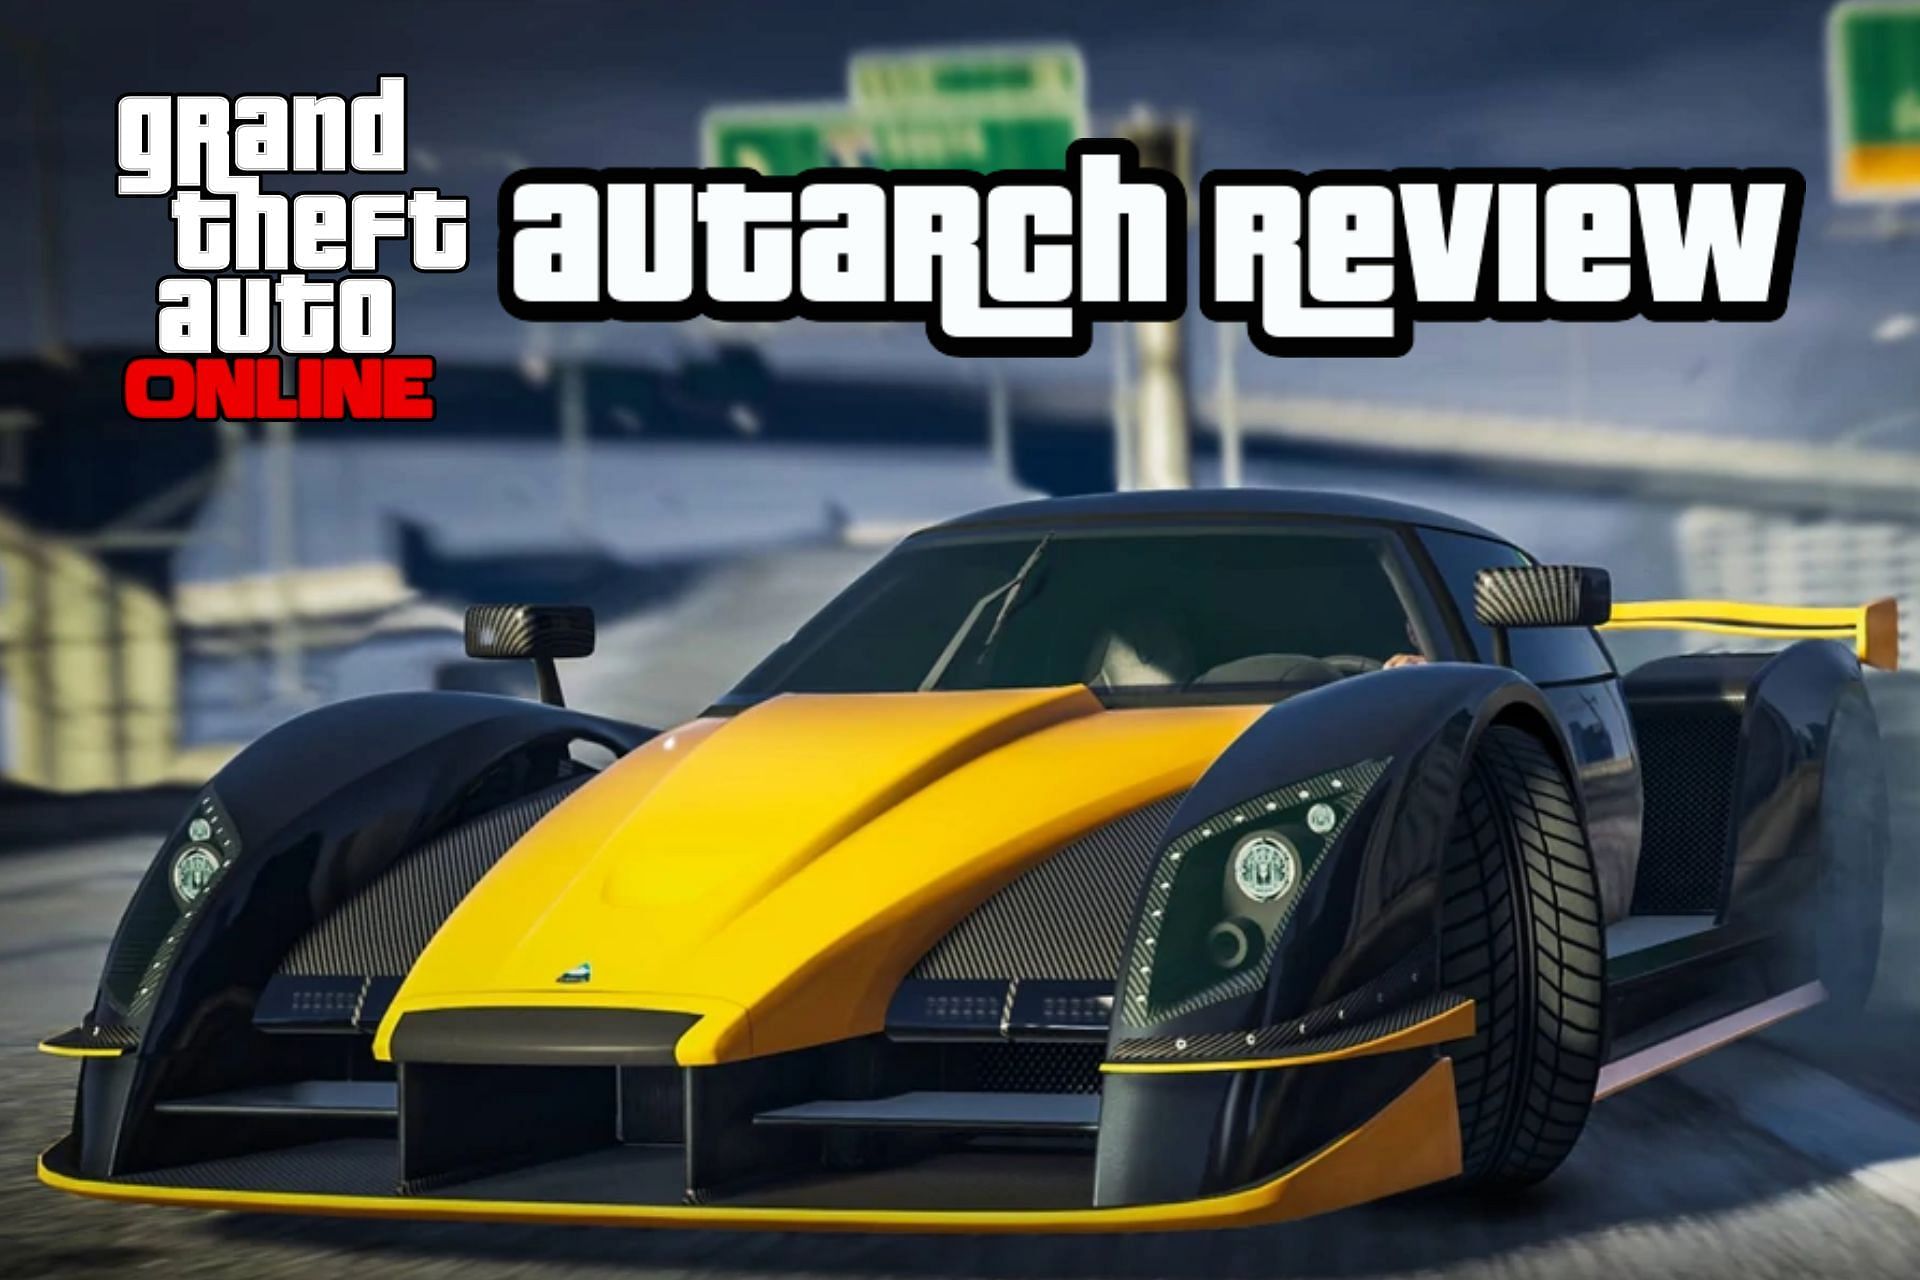 The Overflod Autarch is one of the fastest racecars in GTA Online (Image via Rockstar Games)